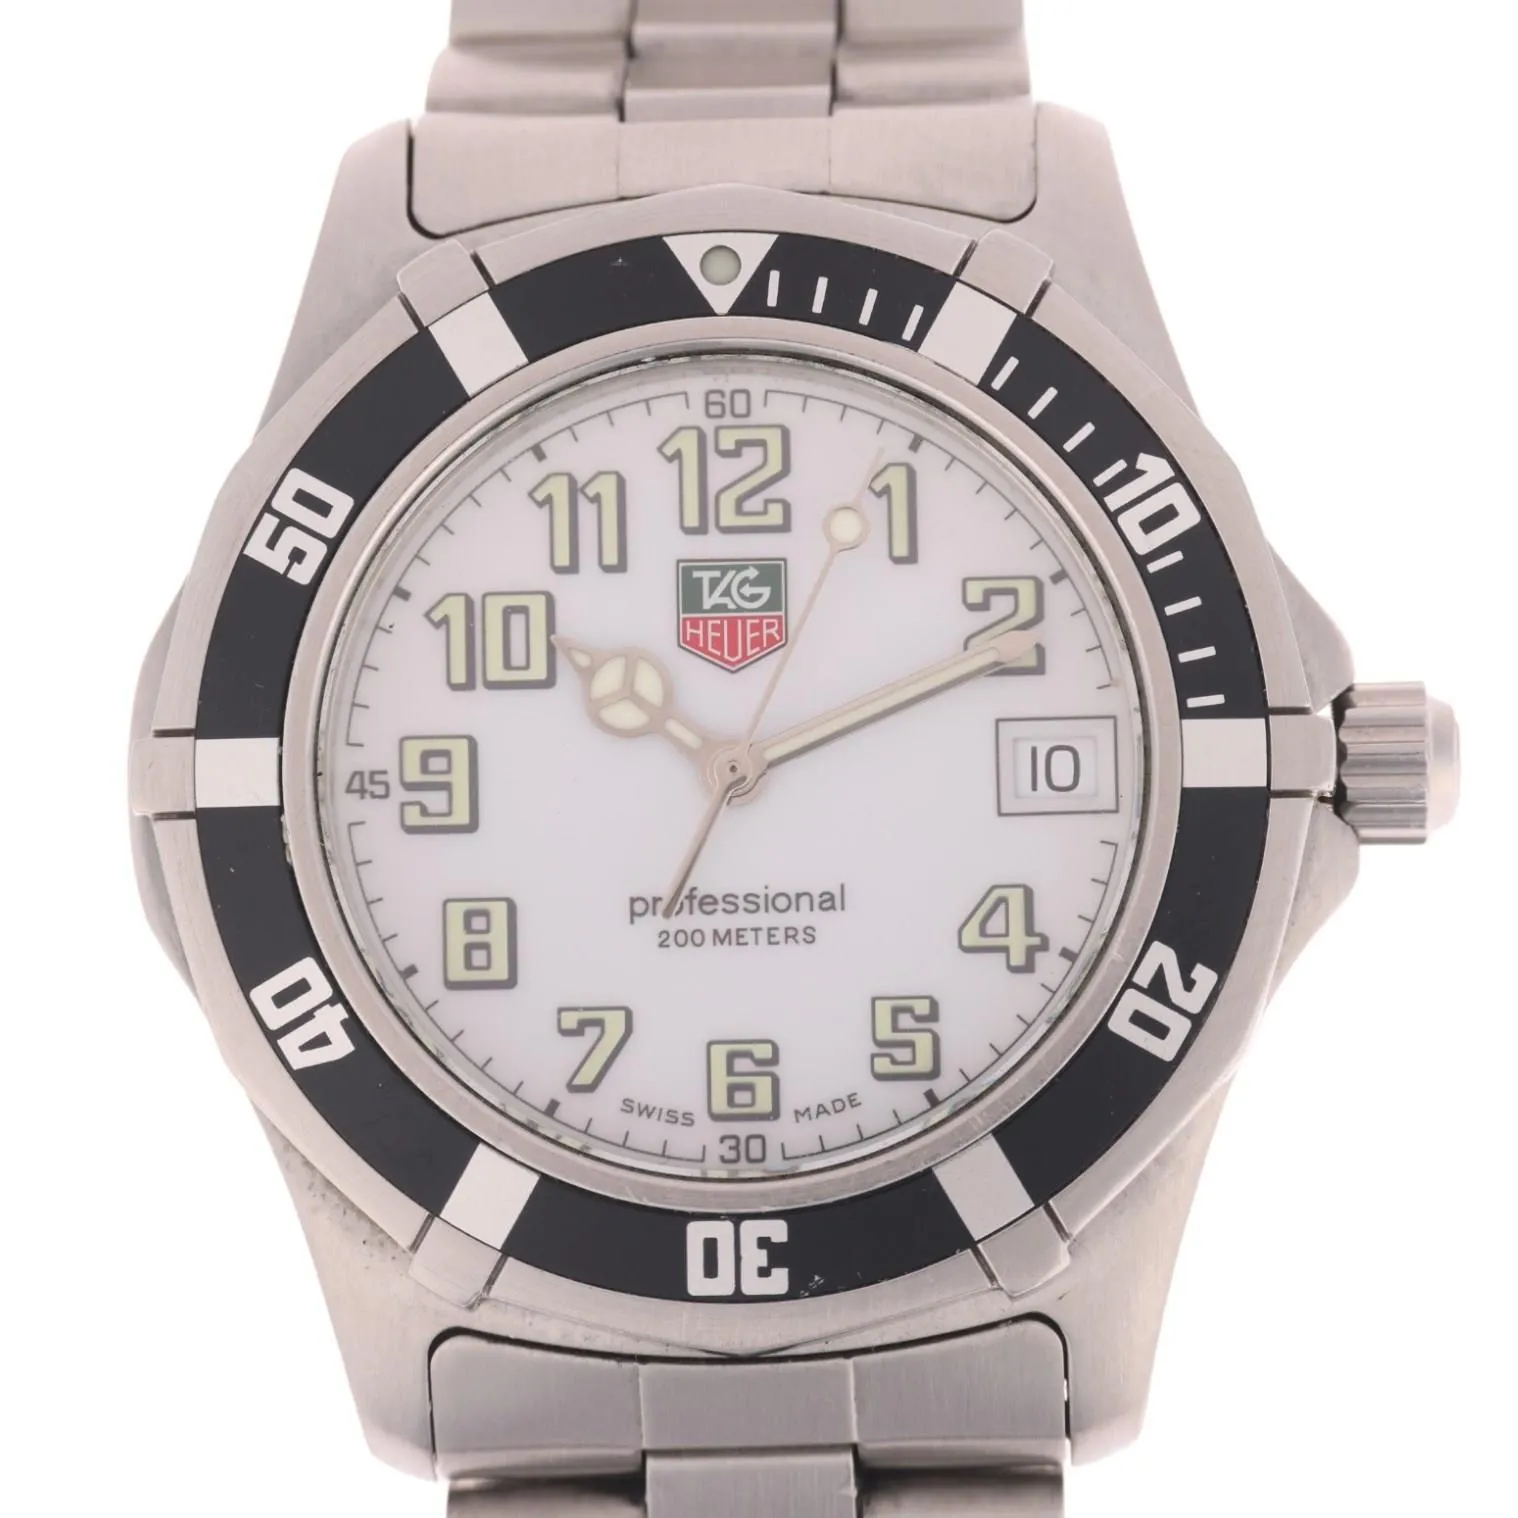 TAG Heuer Professional Wm1111 38mm Stainless steel White